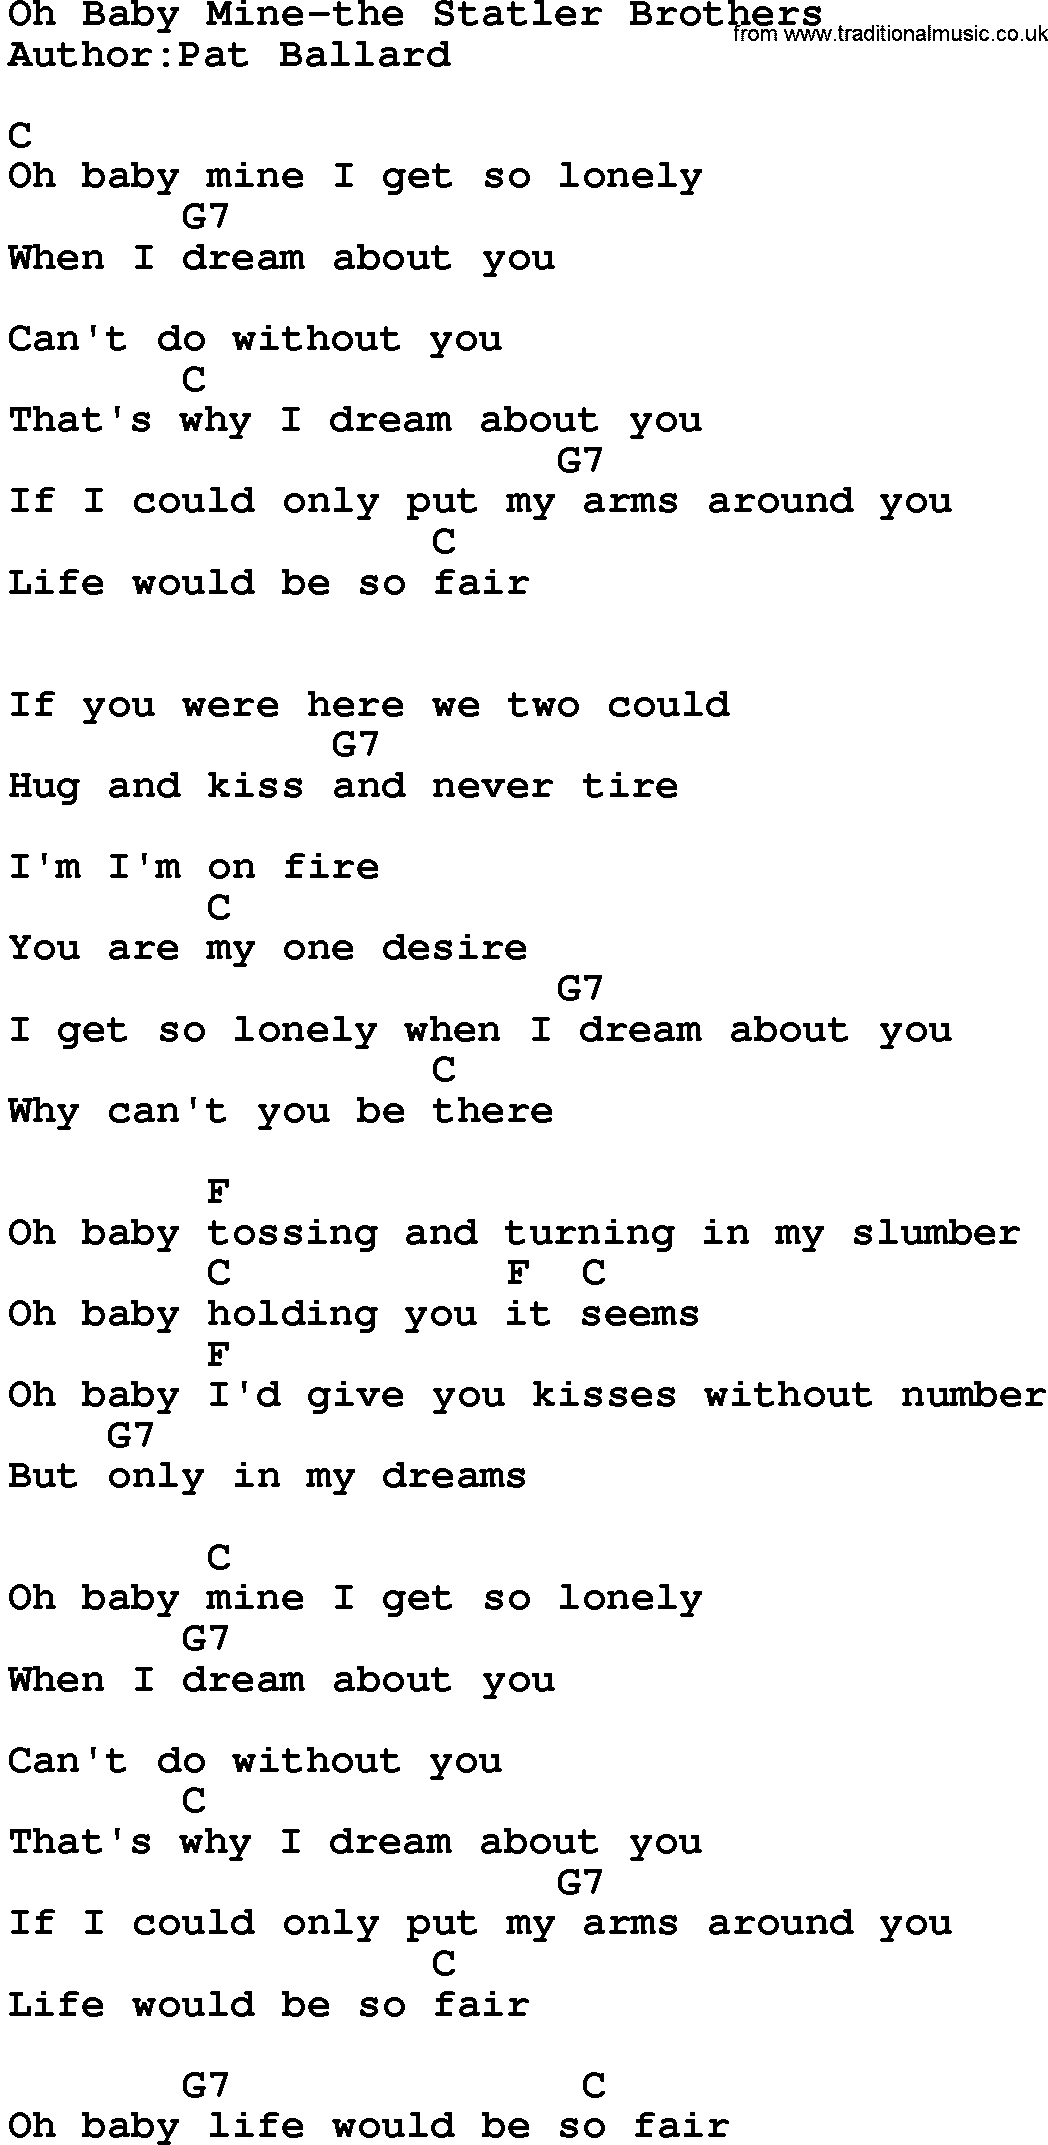 Country music song: Oh Baby Mine-The Statler Brothers lyrics and chords